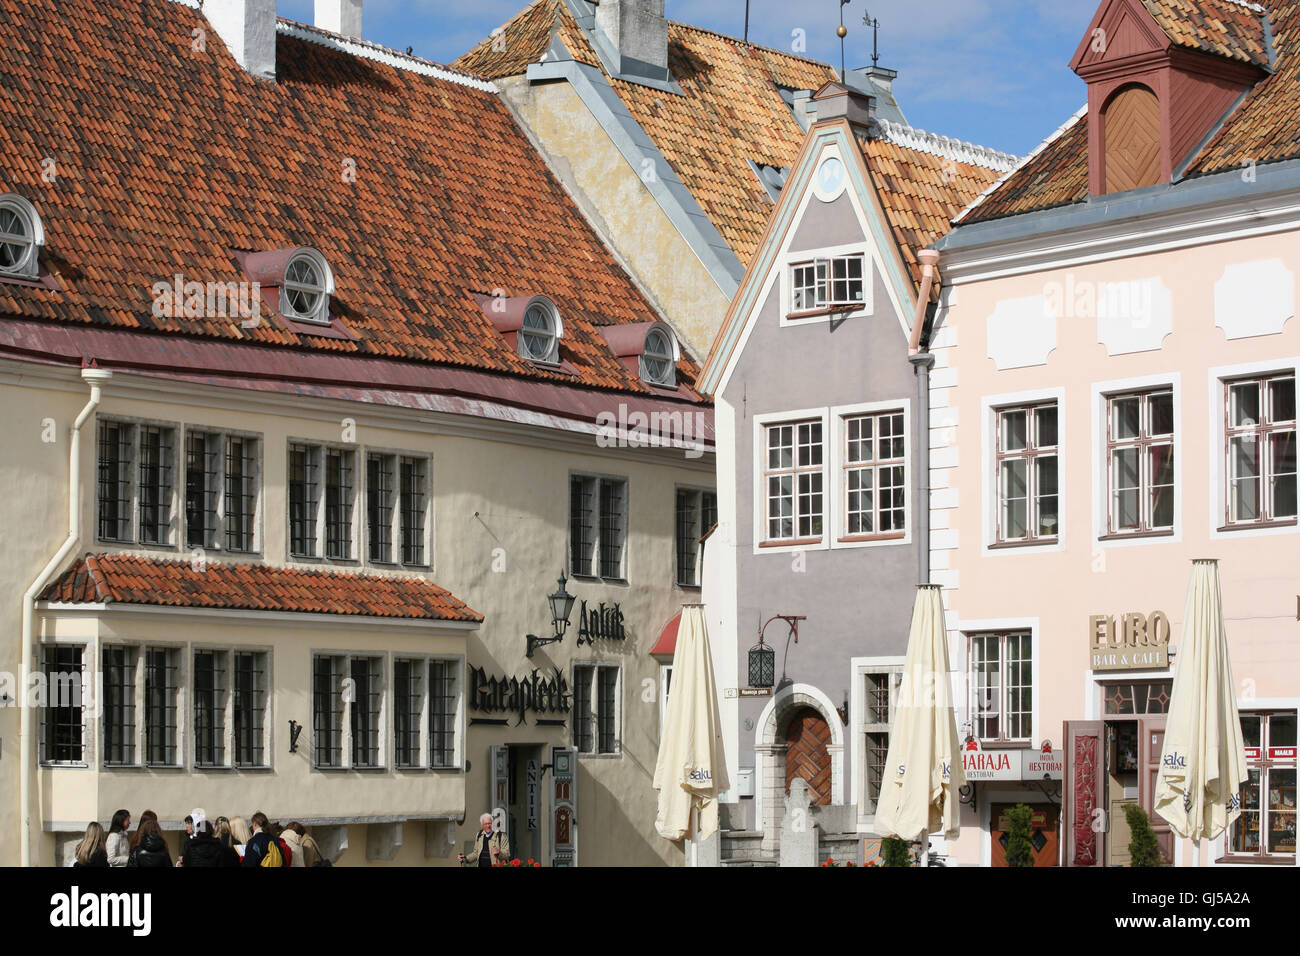 Medieval merchant houses ring Town Hall Square, Raekoja Plats, in the Old Town of Tallinn. The building on the left is Raeapteek Stock Photo